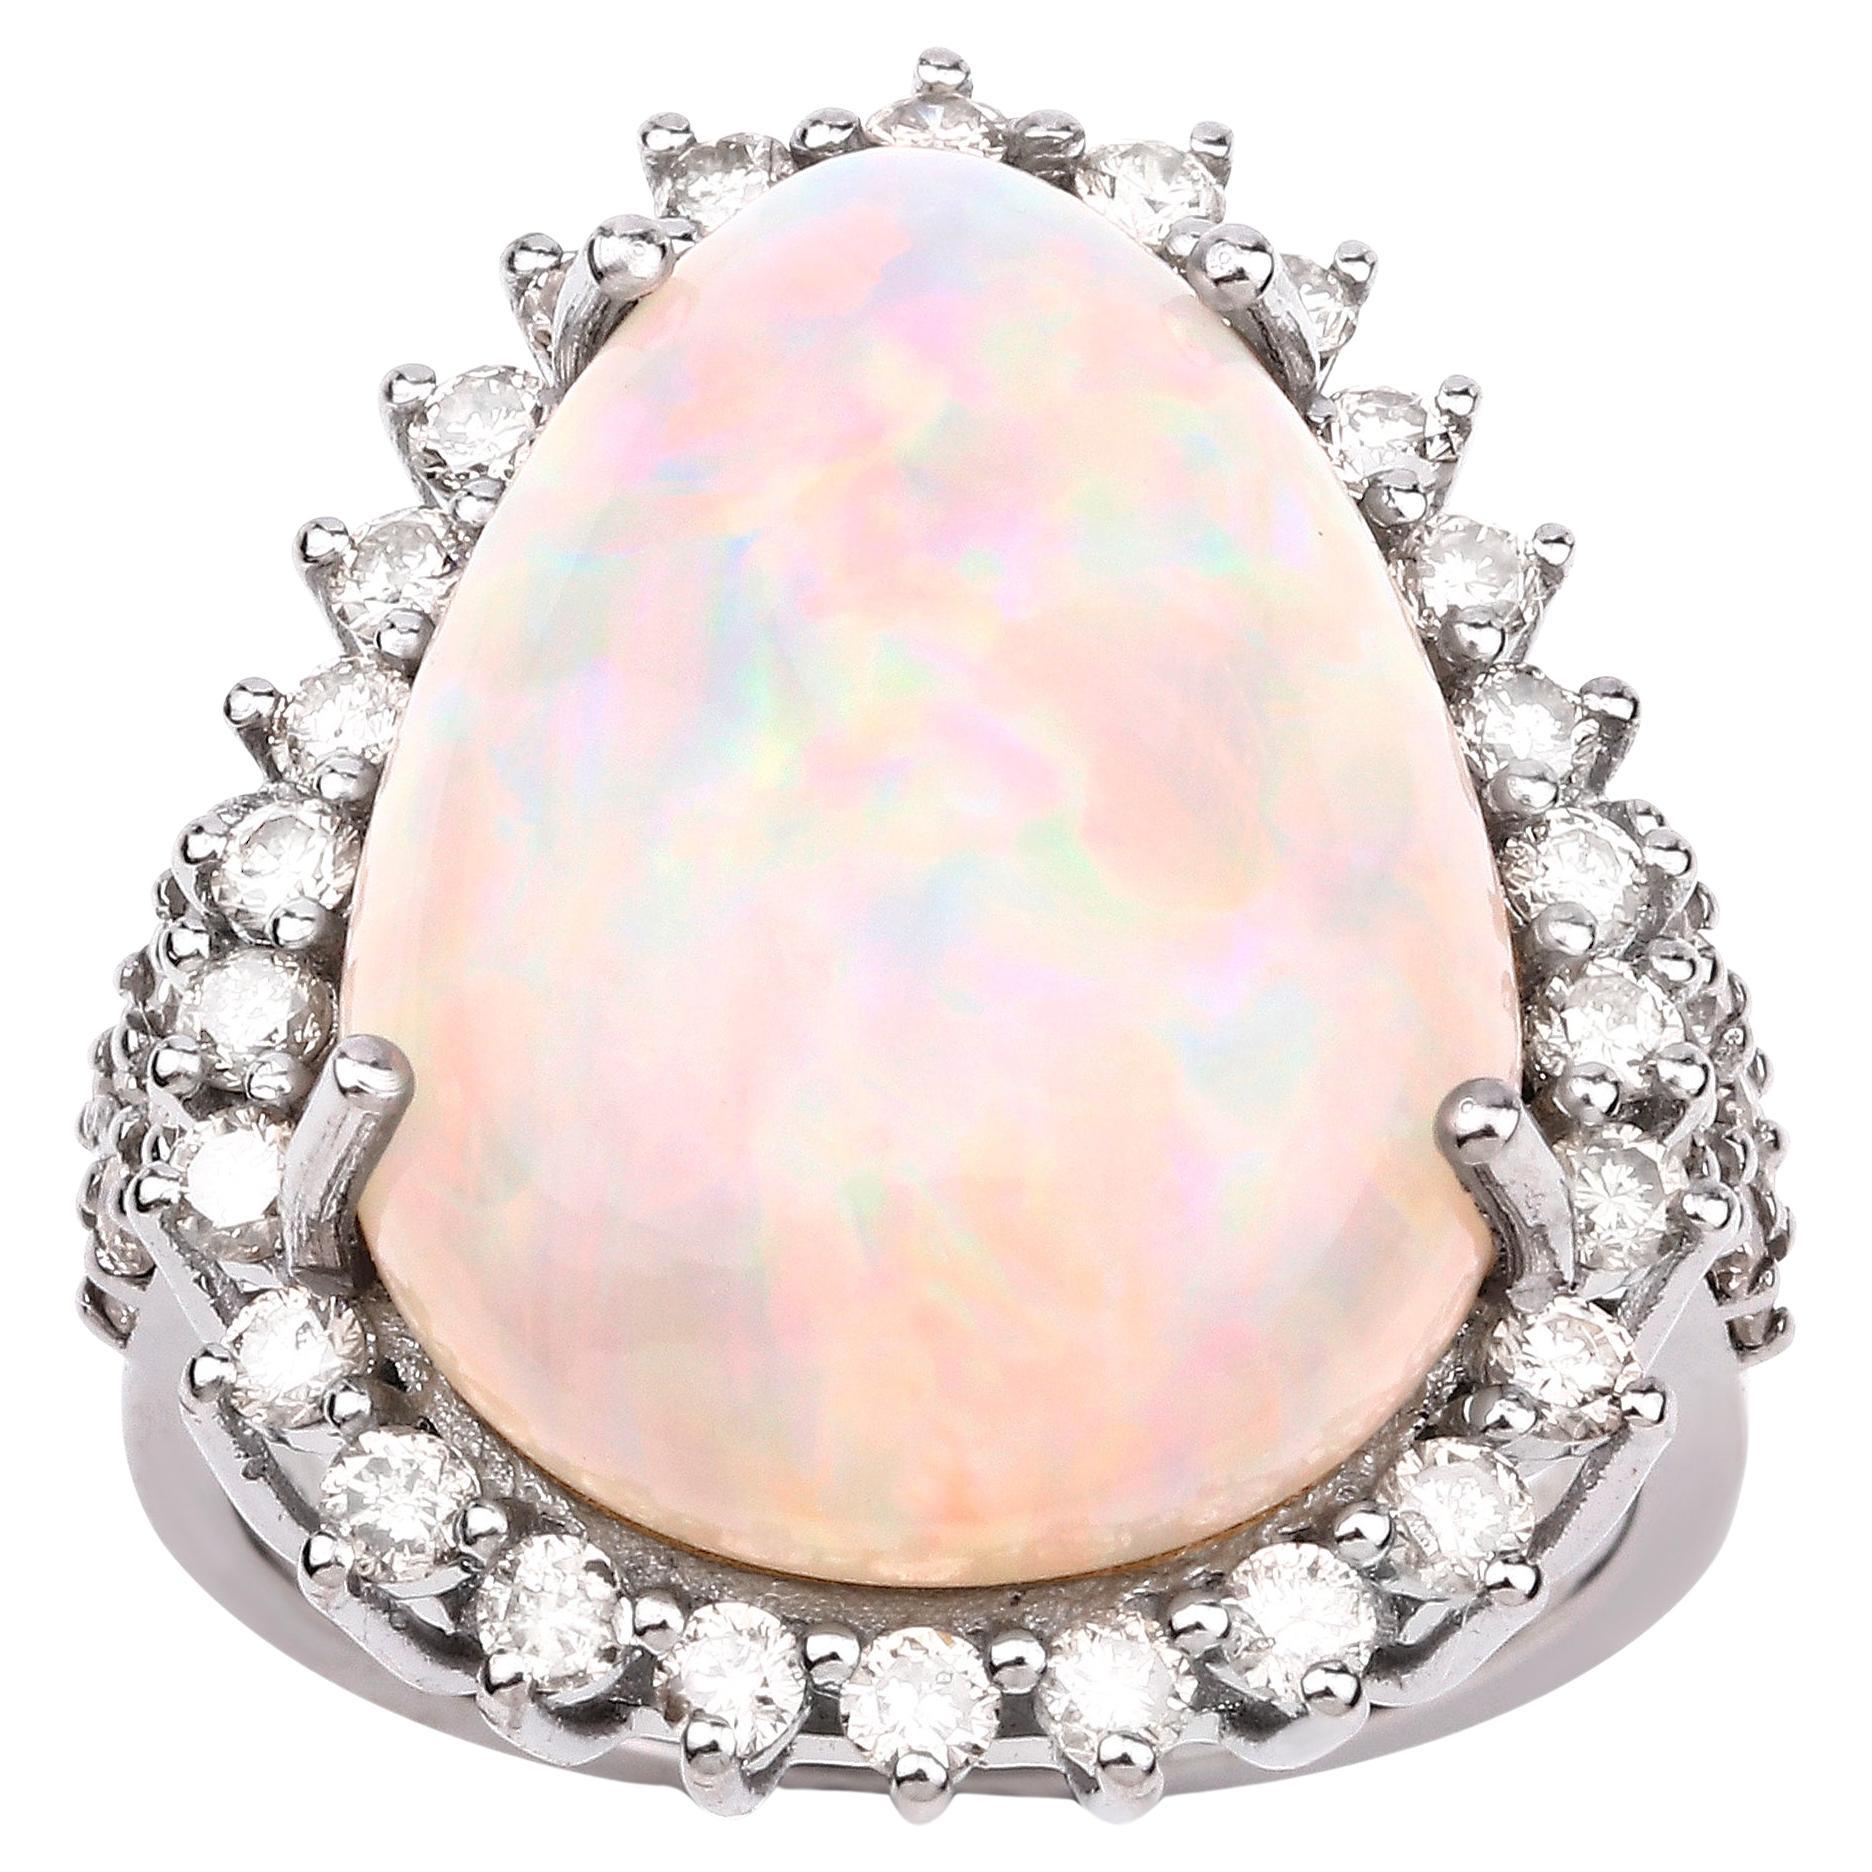 Large Opal Cocktail Ring Diamond Setting 12.6 Carats